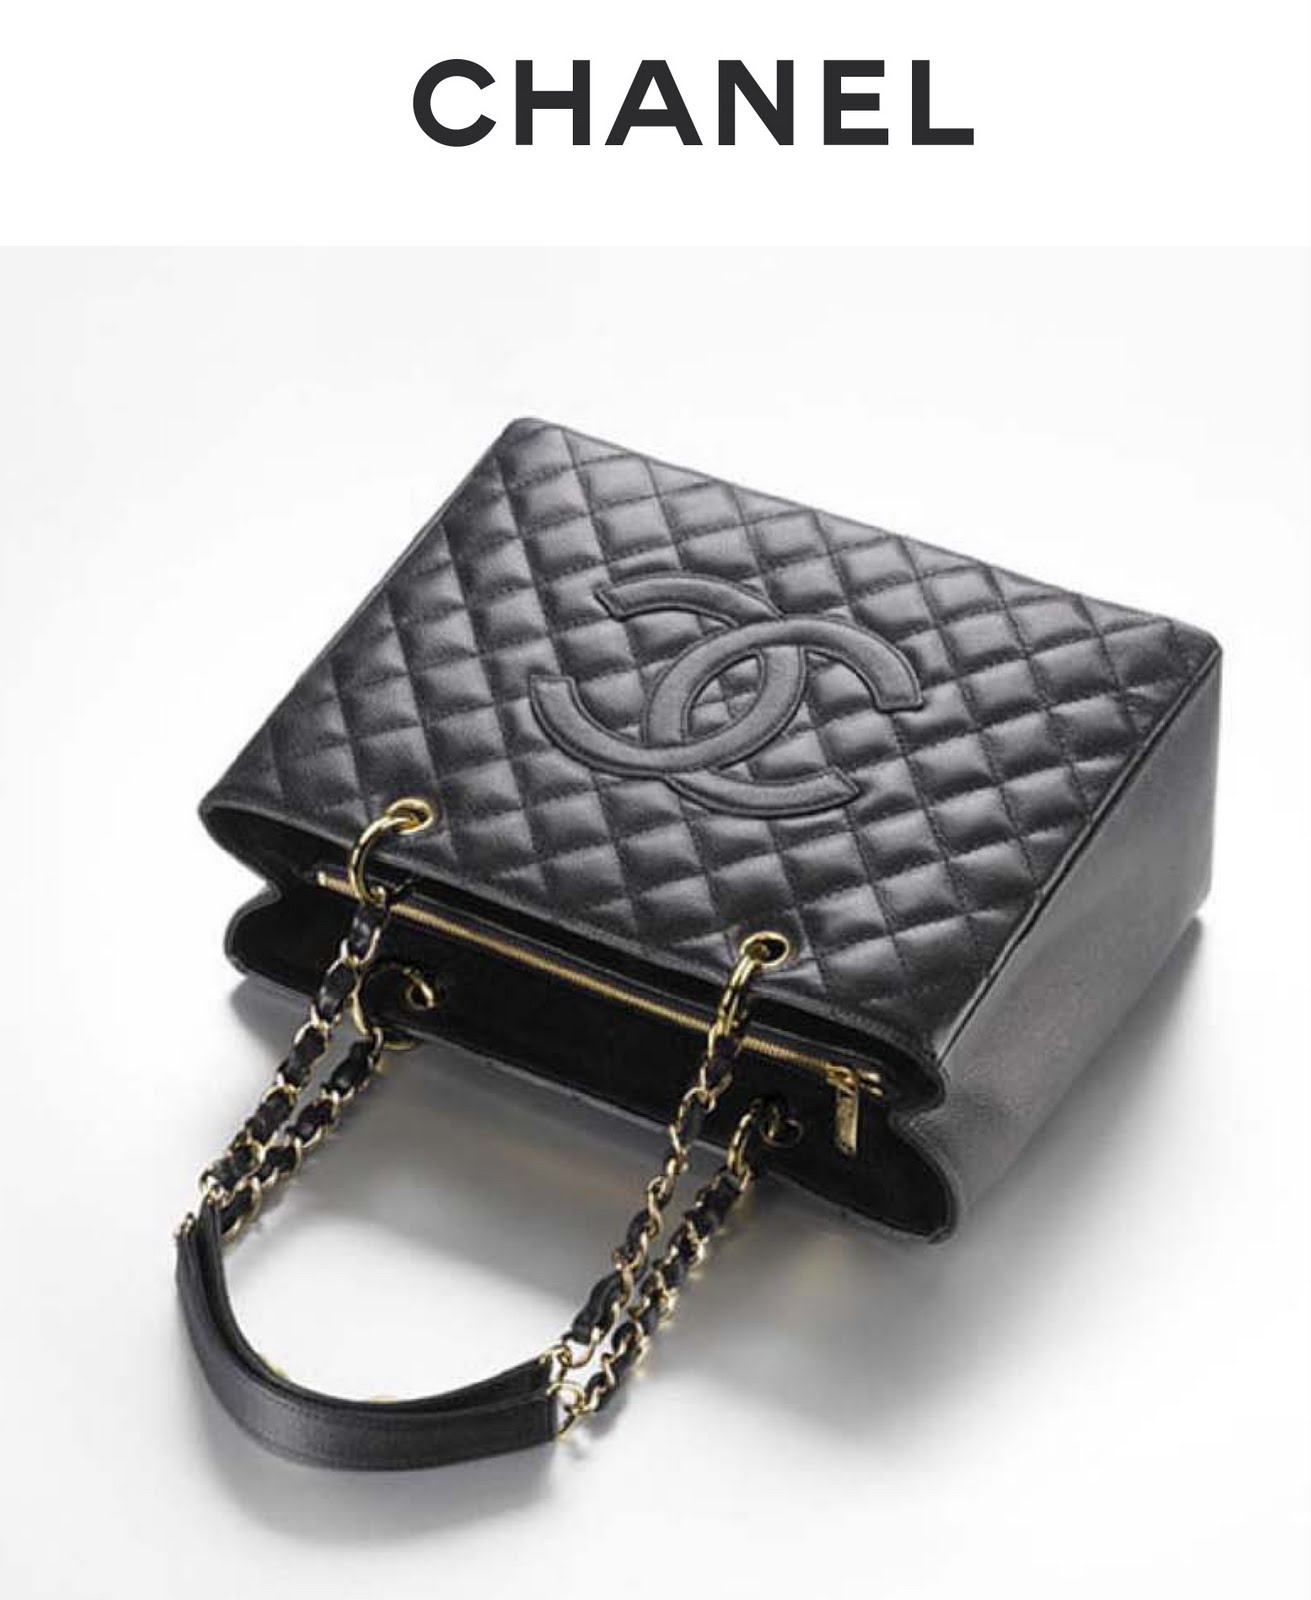 CLASSIC CHANEL QUILTED BAG